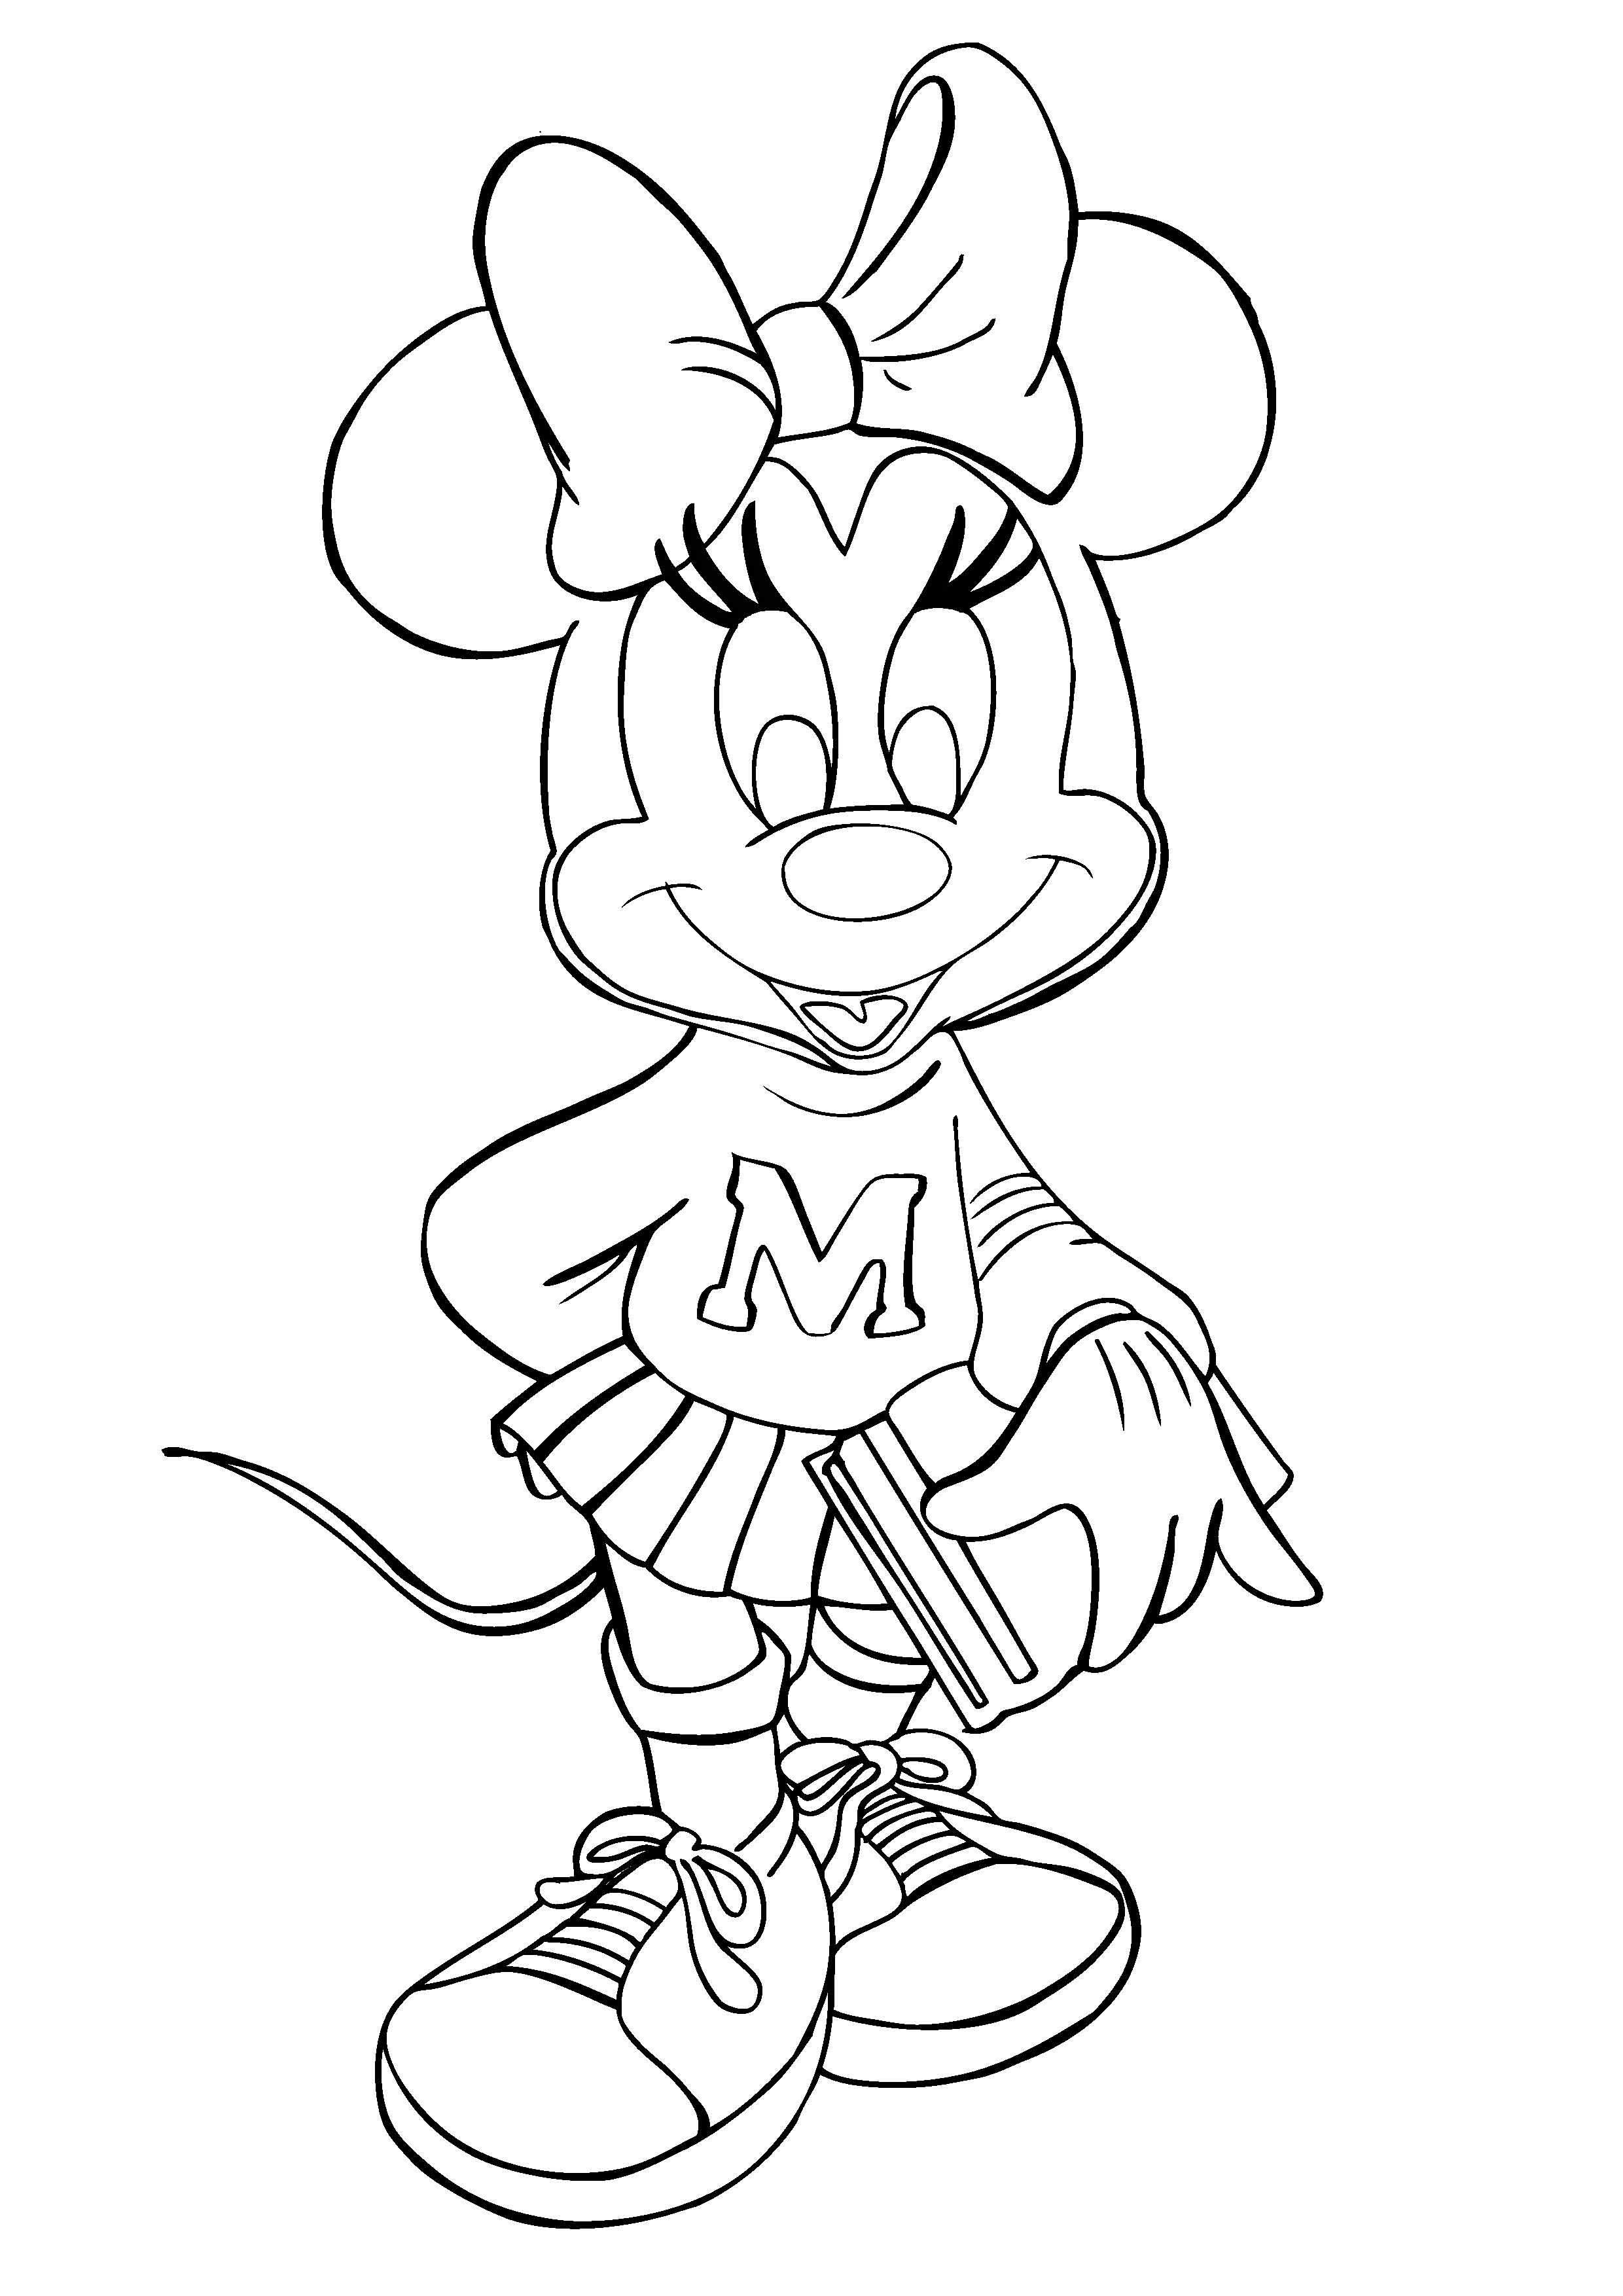 brilliant mouse coloring page : Free Coloring - xlocal.co